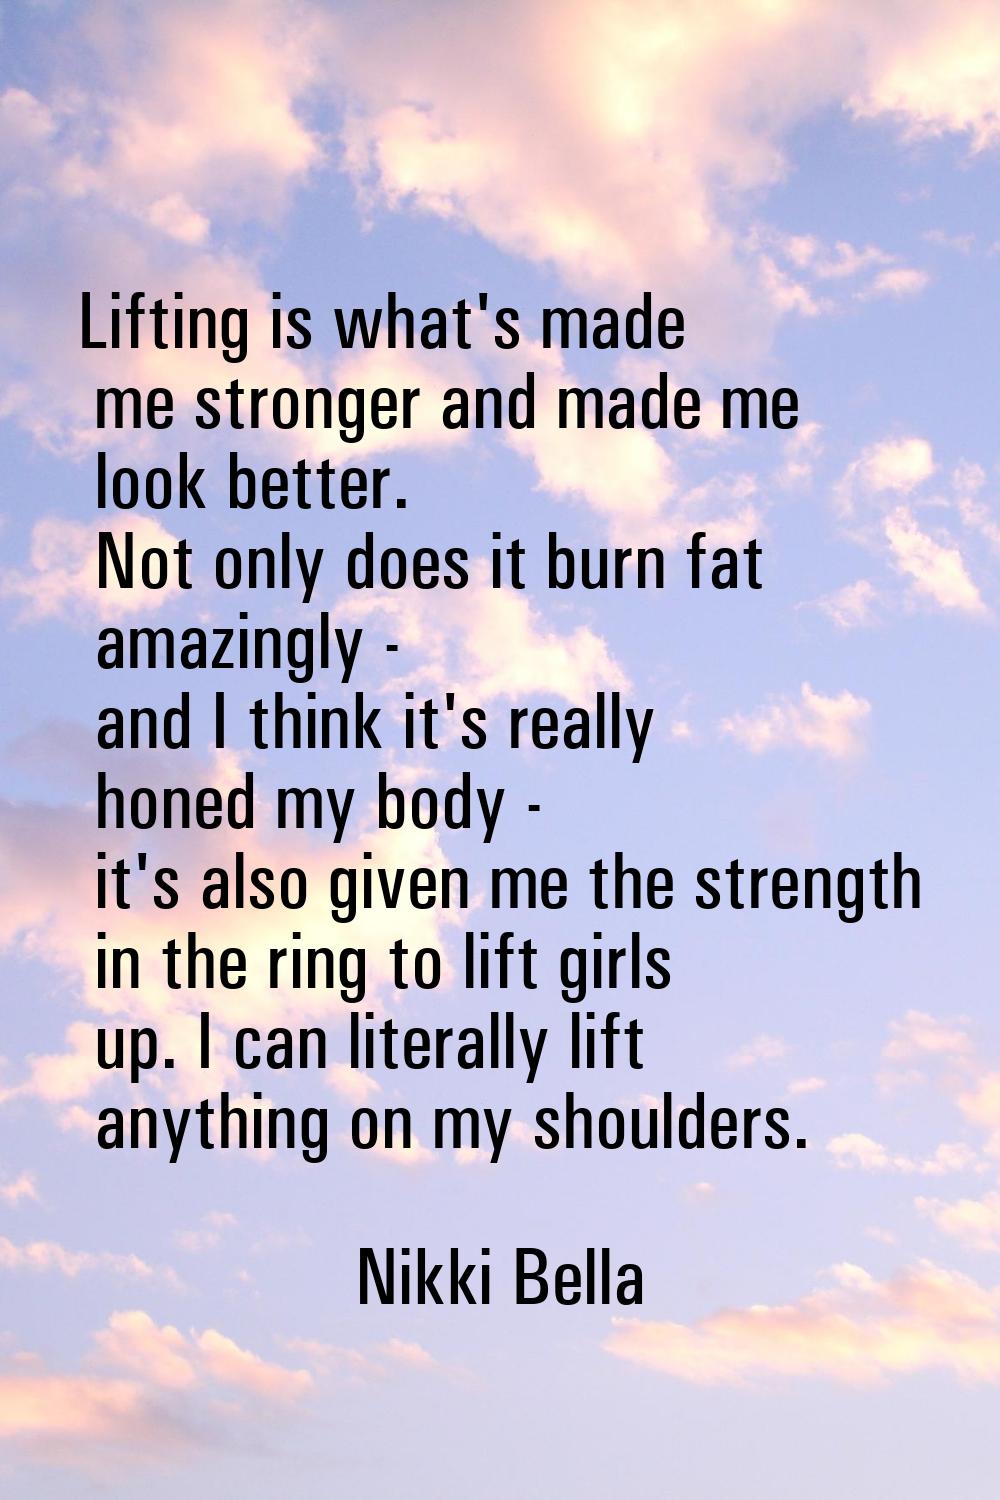 Lifting is what's made me stronger and made me look better. Not only does it burn fat amazingly - a